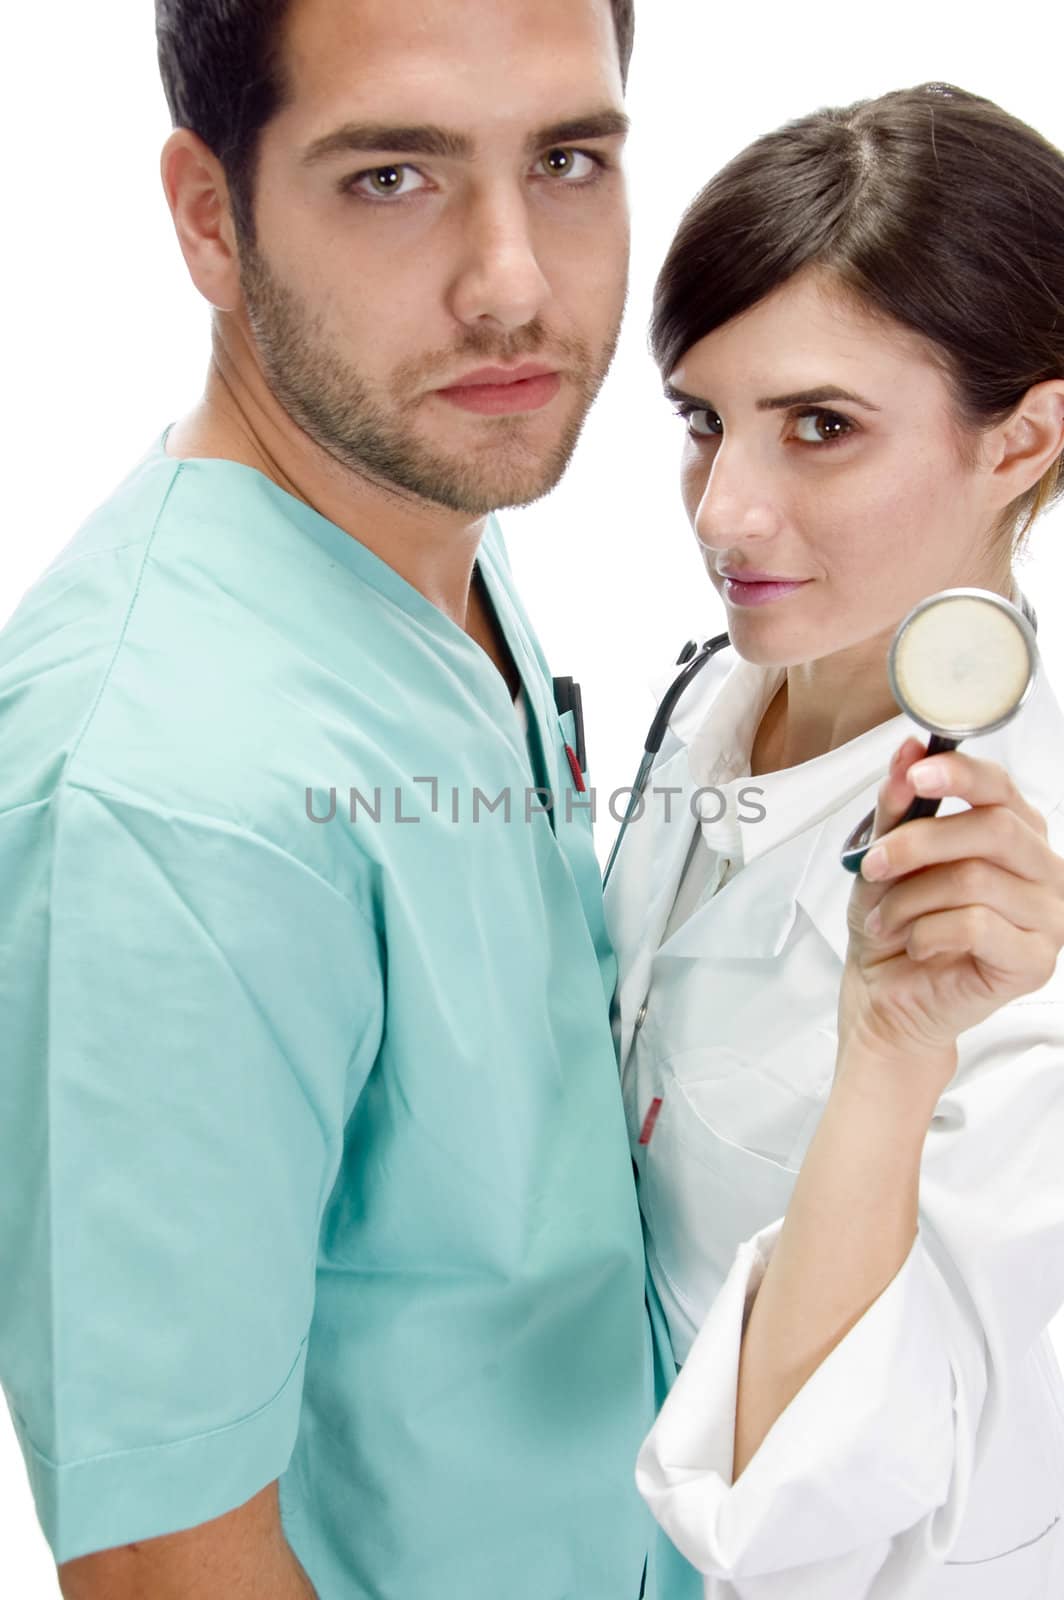 nurse standing with patient showing stethoscope by imagerymajestic